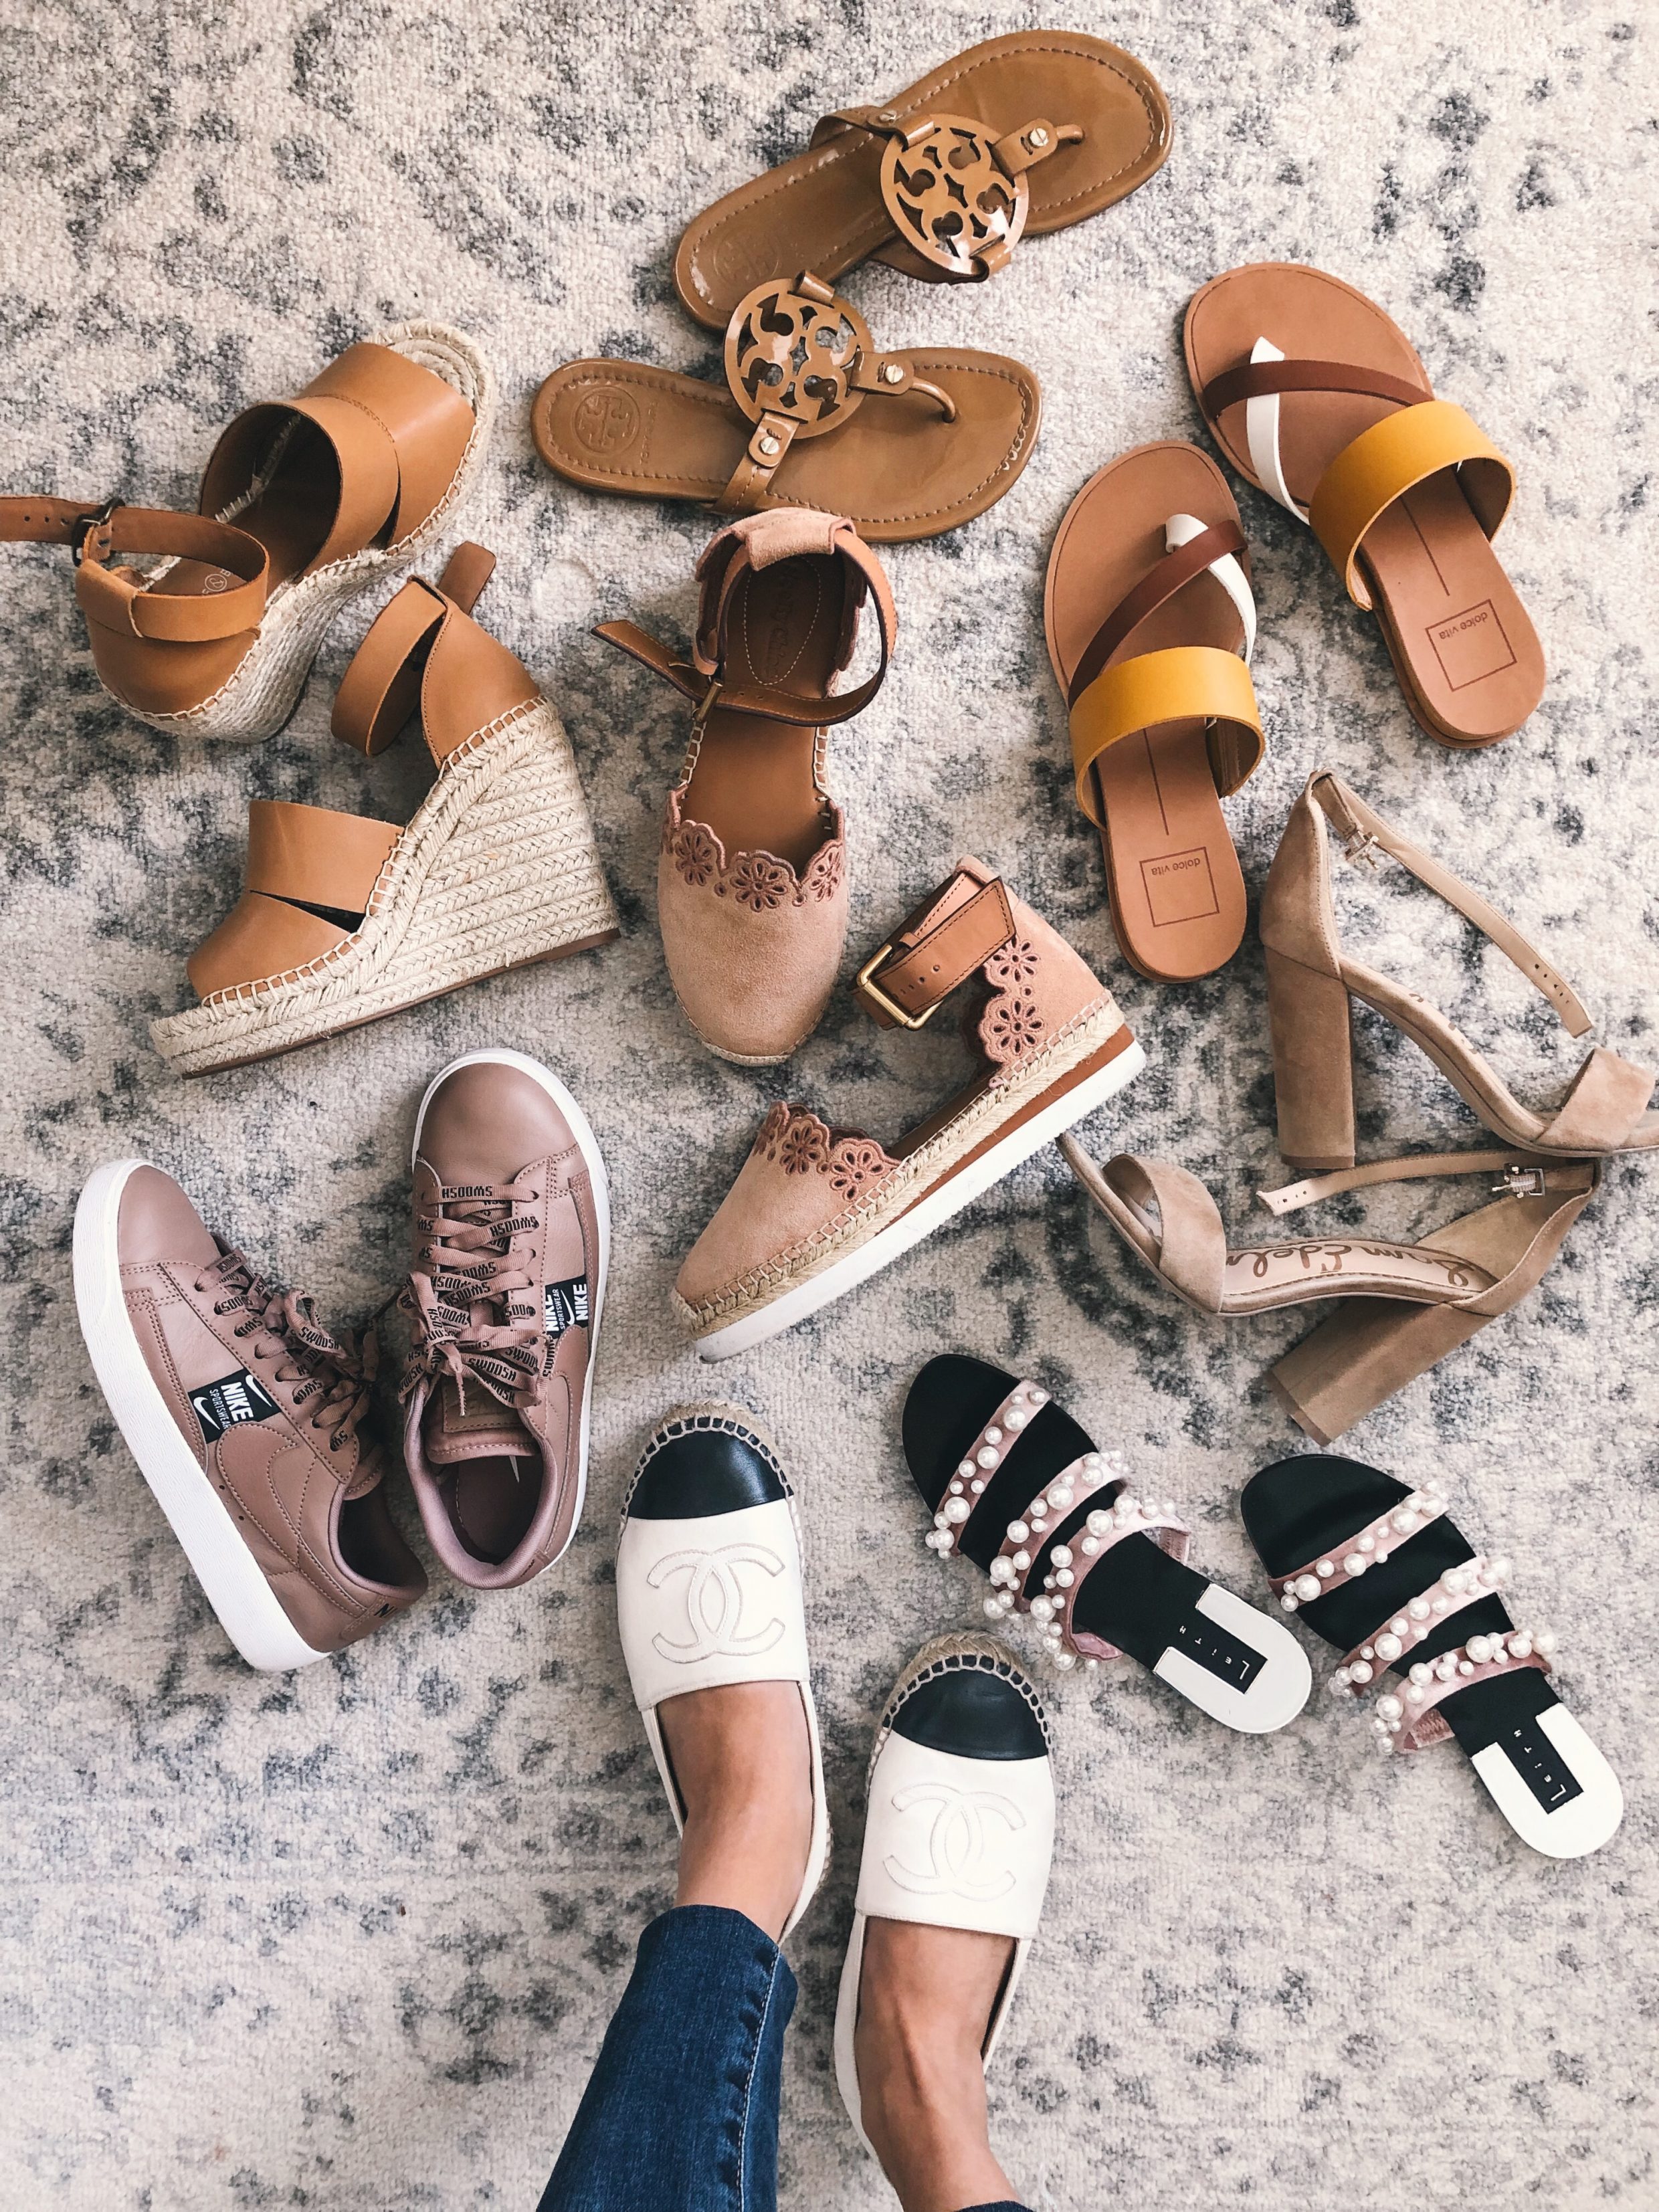 Best shoes for spring and summer